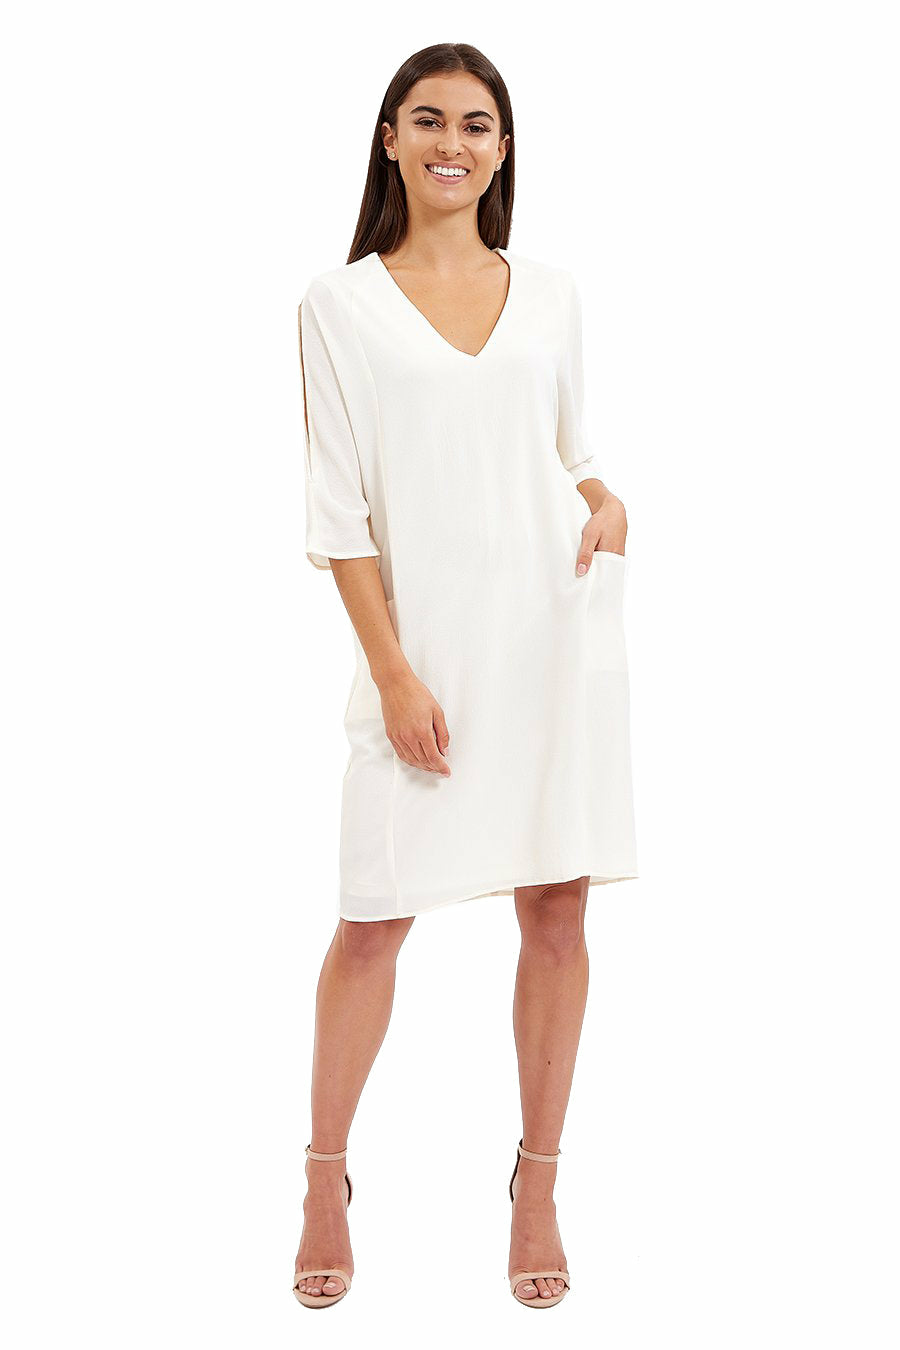 Divine White Relaxed Fit Midi Dress With Pockets JEN30166-W